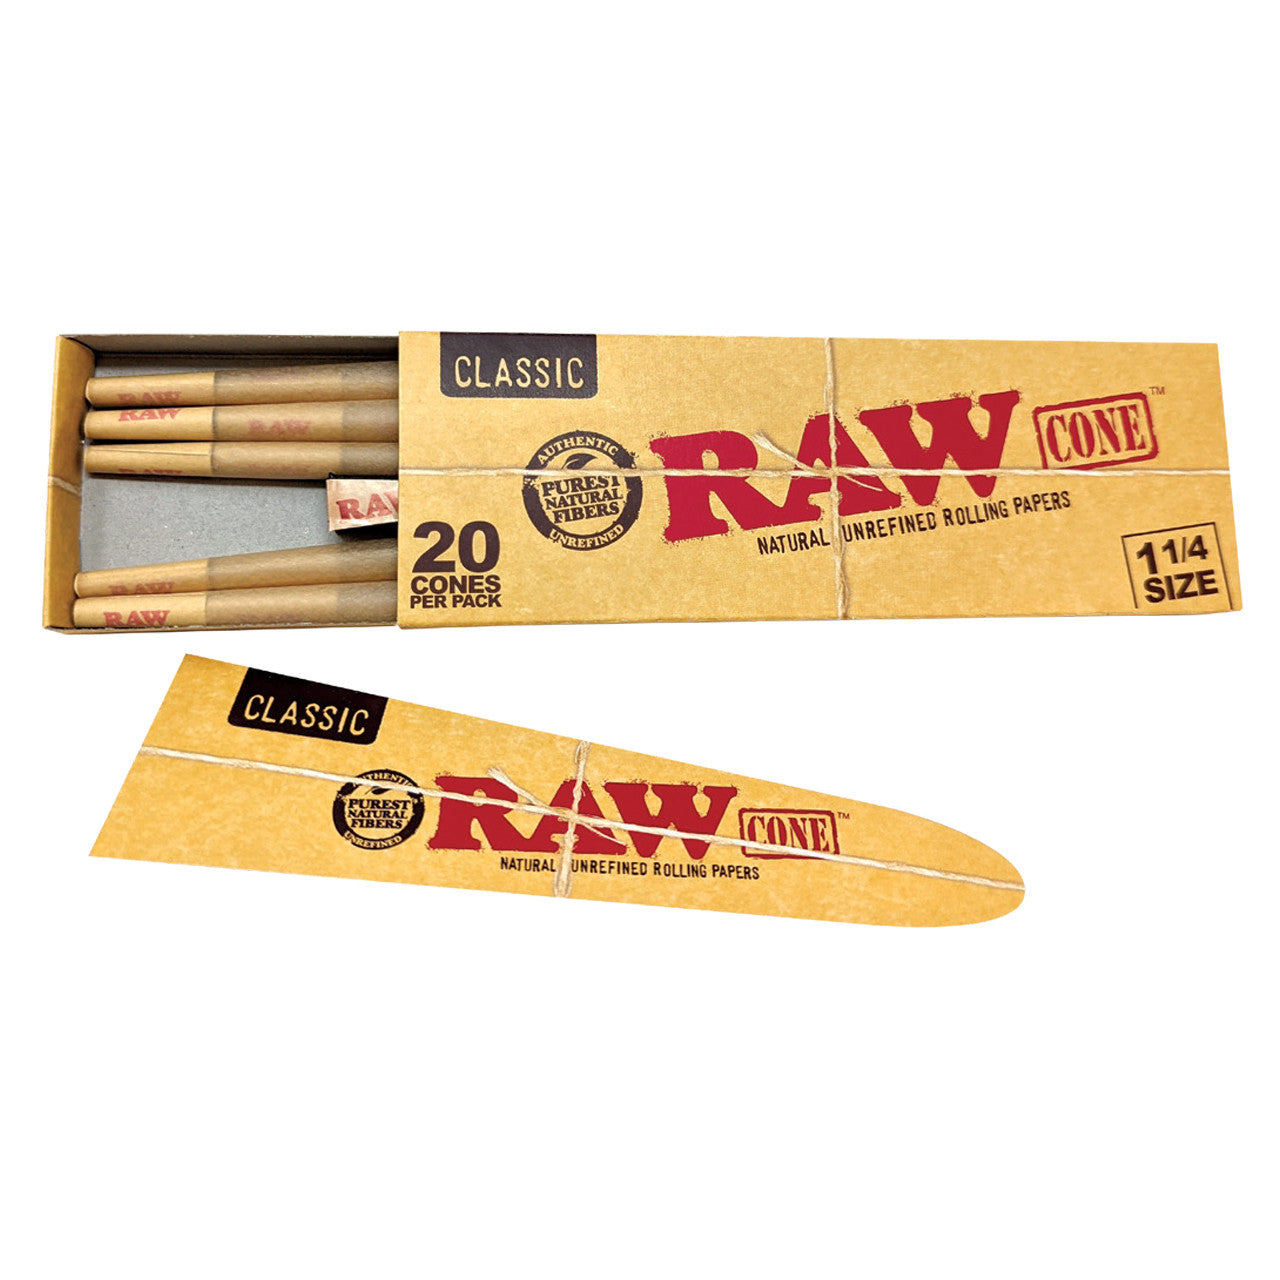 RAW Classic Pre-Roll Cone 20 Pack with Funnel